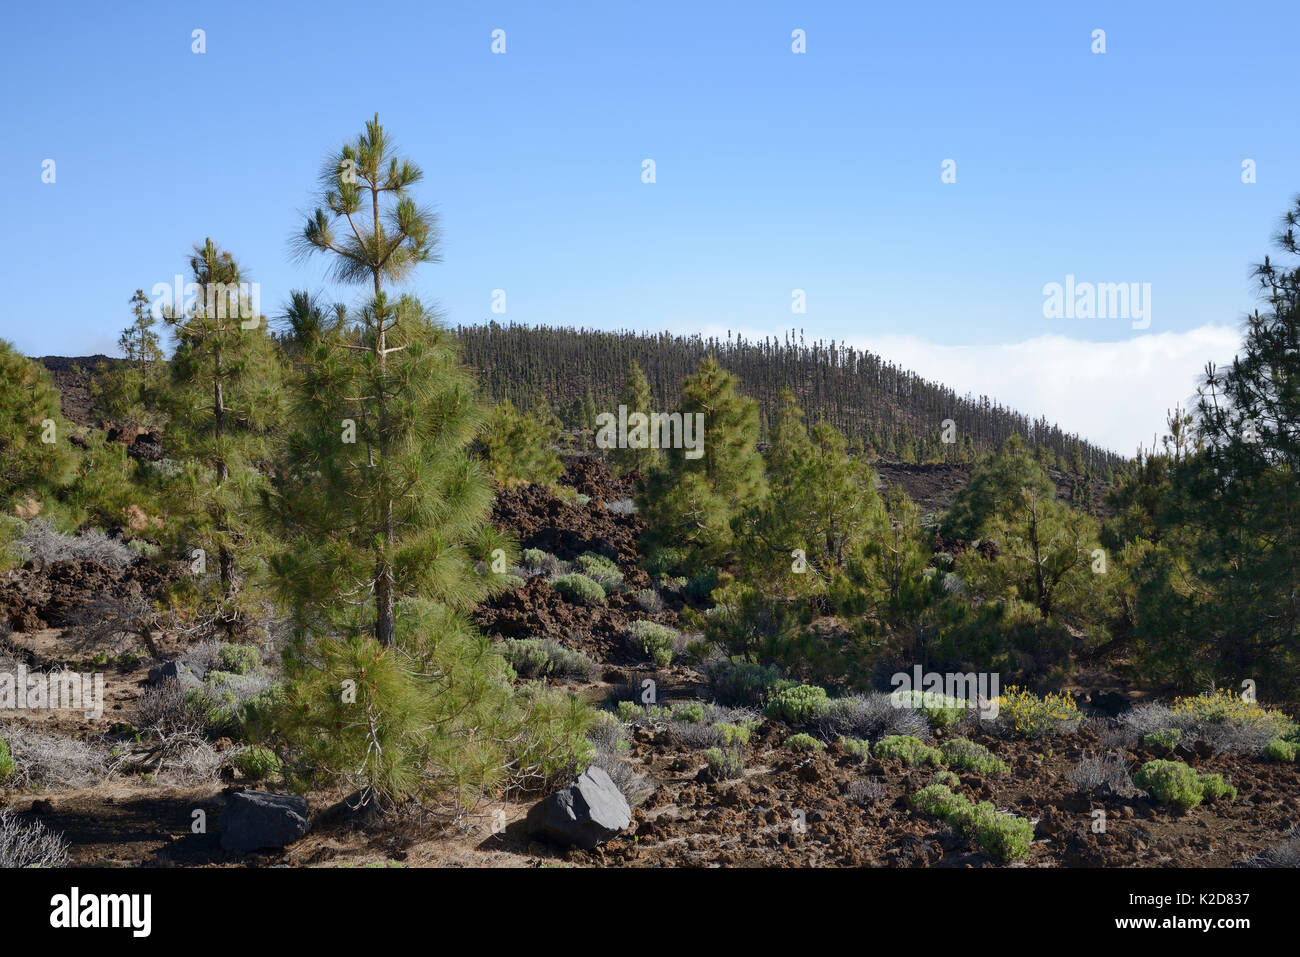 Canary island pines (Pinus canariensis), endemic to the Canaries, growing among old volcanic lava flows below Mount Teide, Teide National Park, Tenerife, Canary Islands, May. Stock Photo